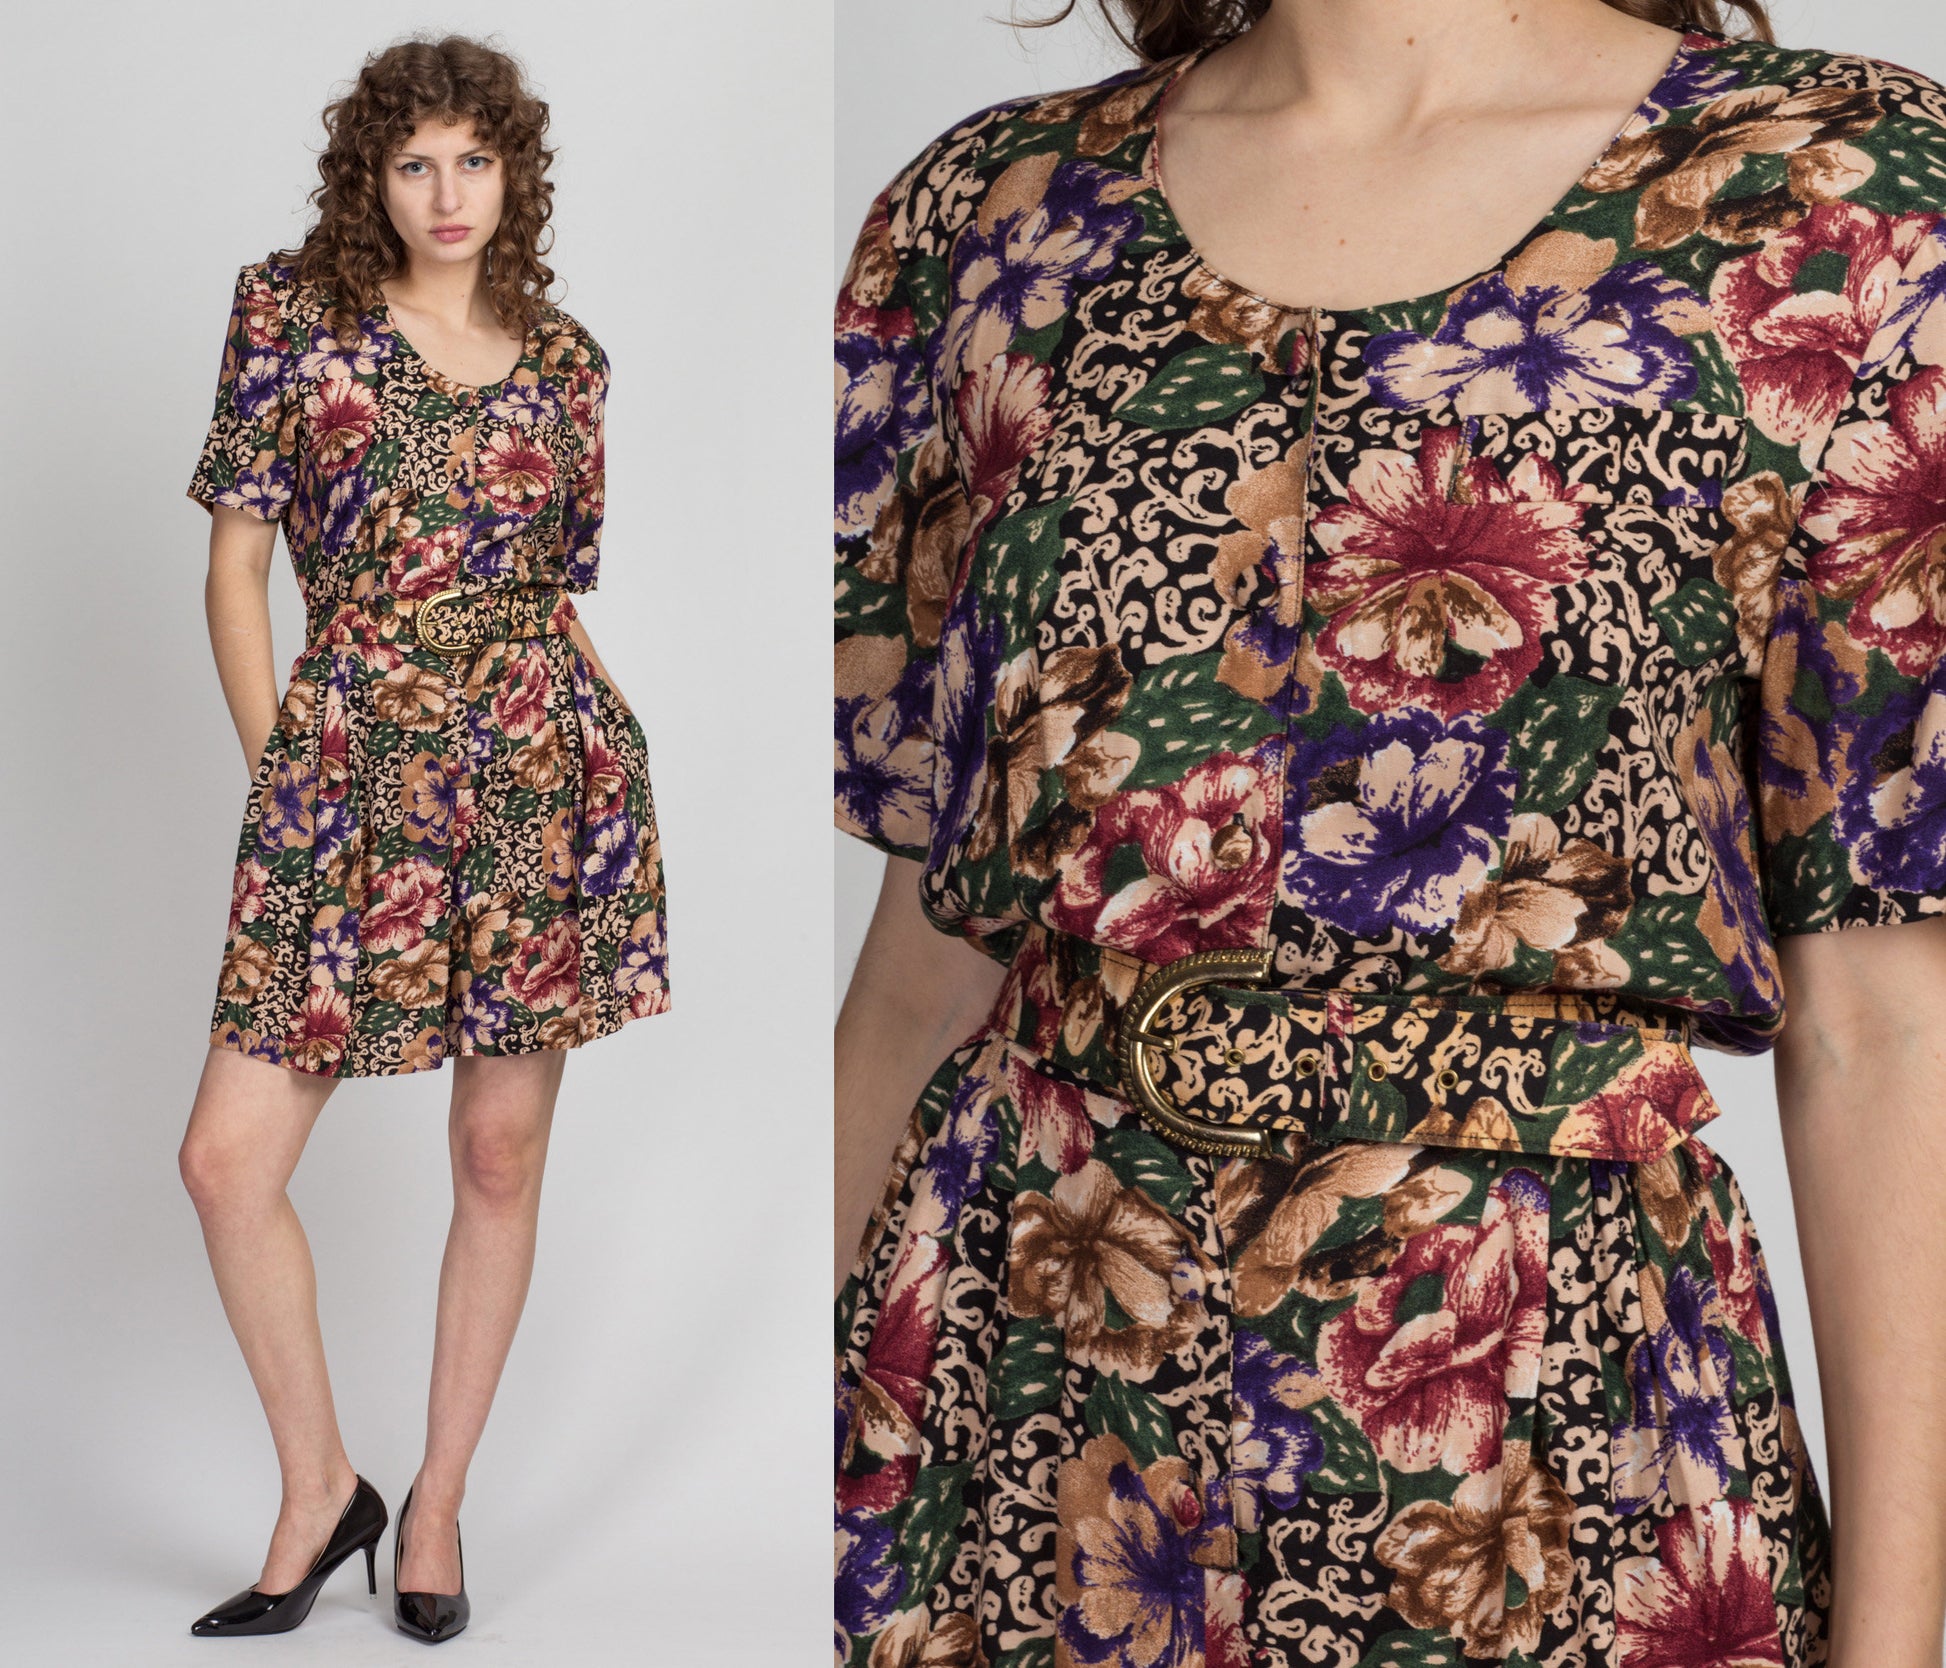 Vintage Floral Belted Romper - Medium to Large | 80s 90s Grunge Button Up Outfit